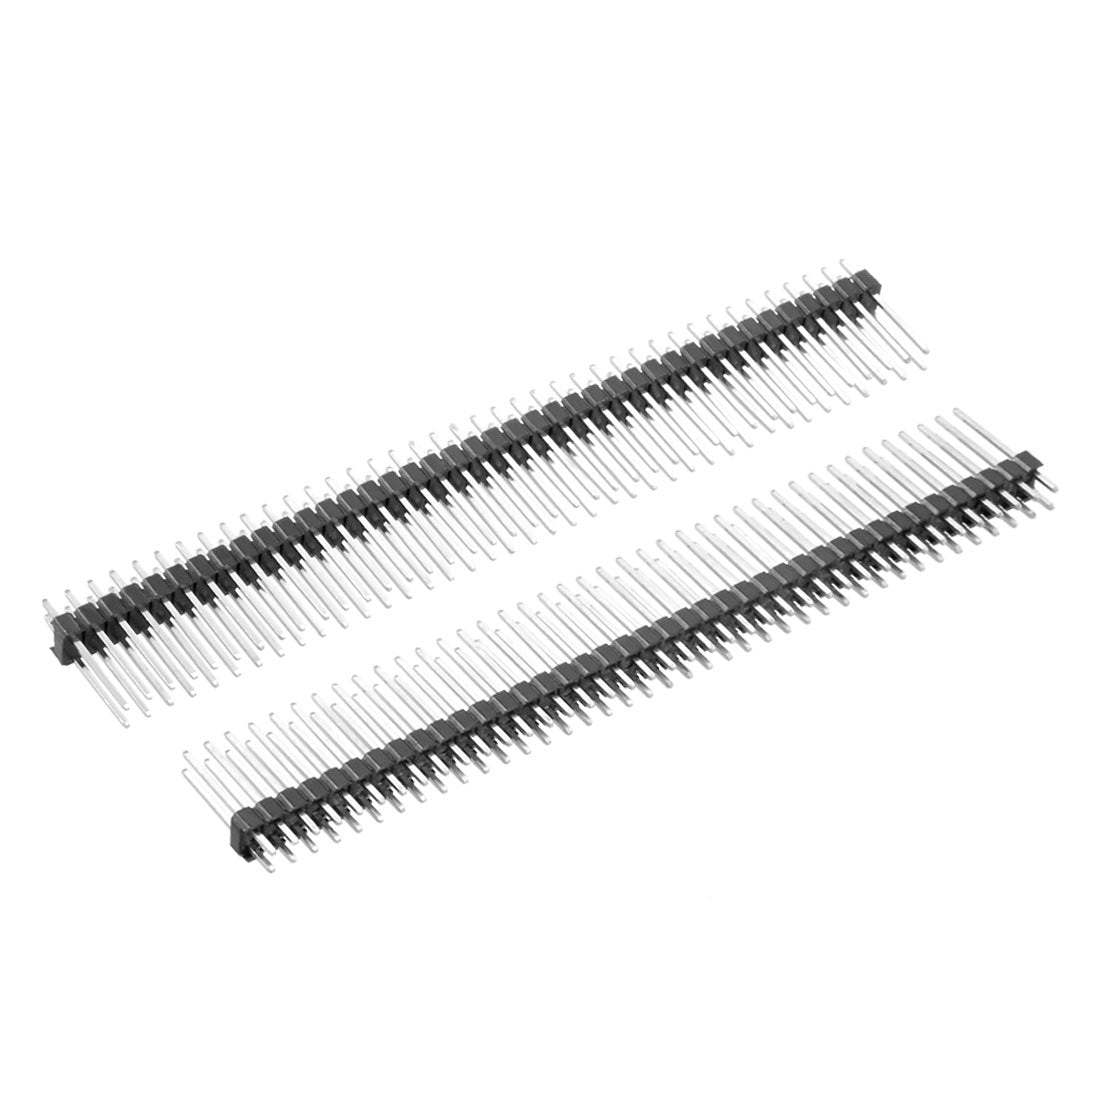 uxcell Uxcell 5Pcs 2.54mm Pitch 40-Pin 17mm Length Double Row Straight Connector Pin Header Strip for Arduino Prototype Shield